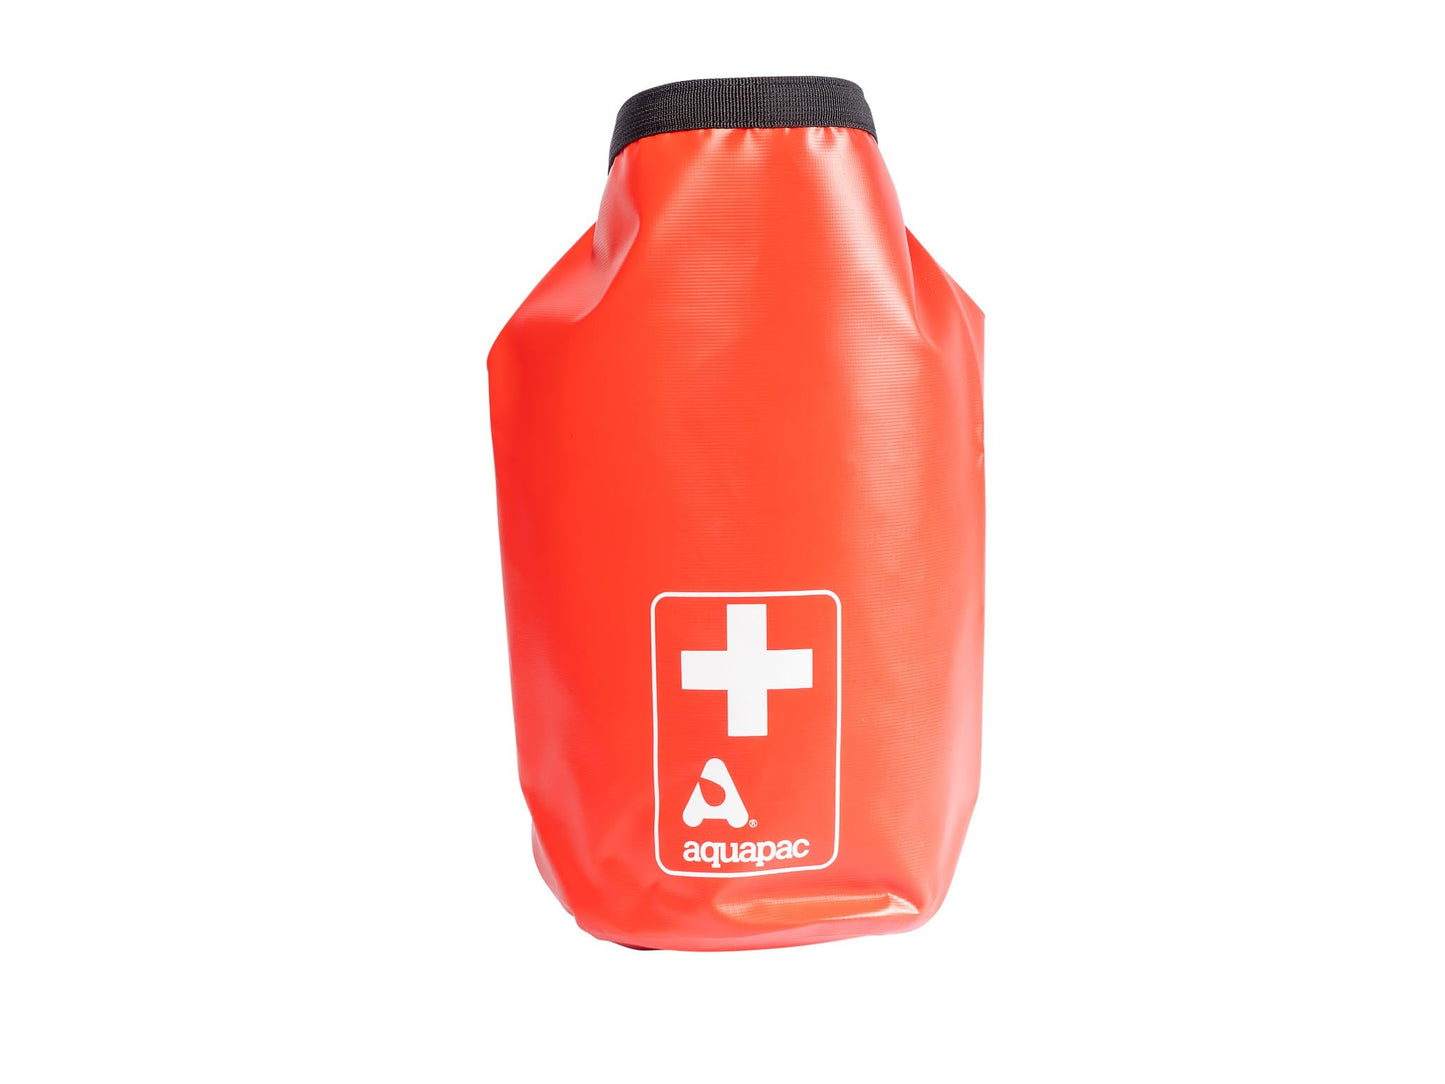 Aquapac Waterproof First Aid Kit Dry Bag for Emergency Use with Secure Buckle - Red